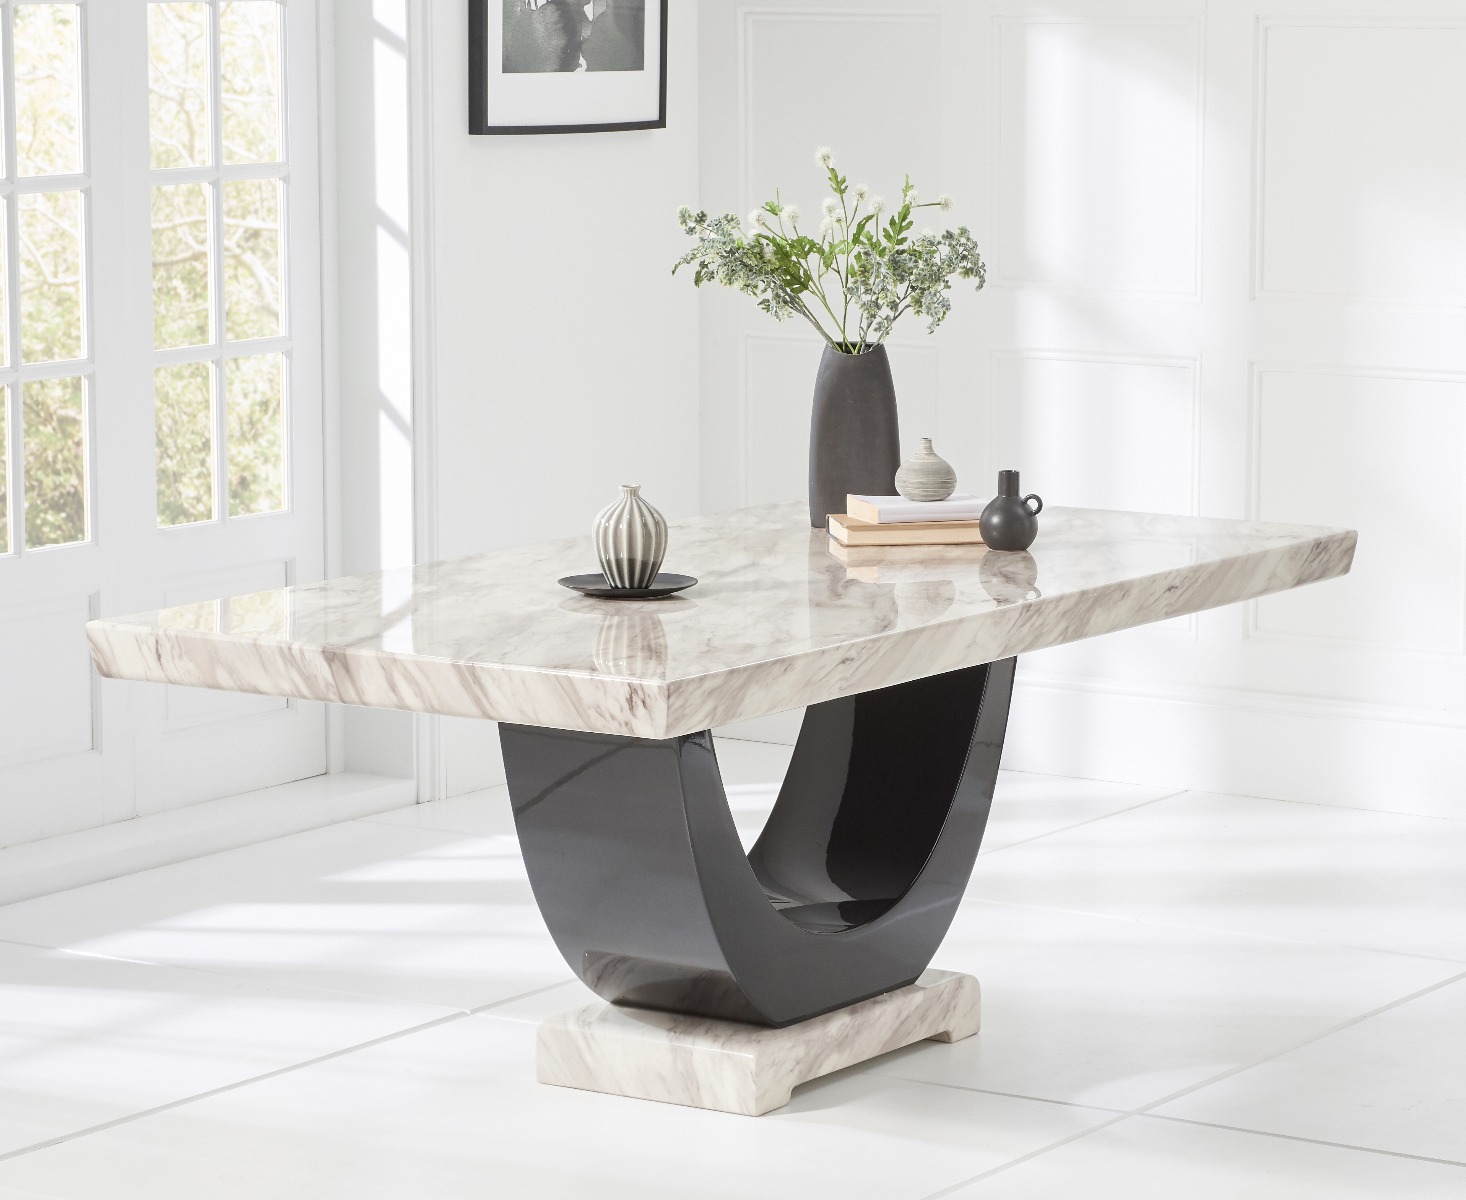 Photo 2 of Raphael 200cm cream and black pedestal marble dining table with 8 grey sophia chairs